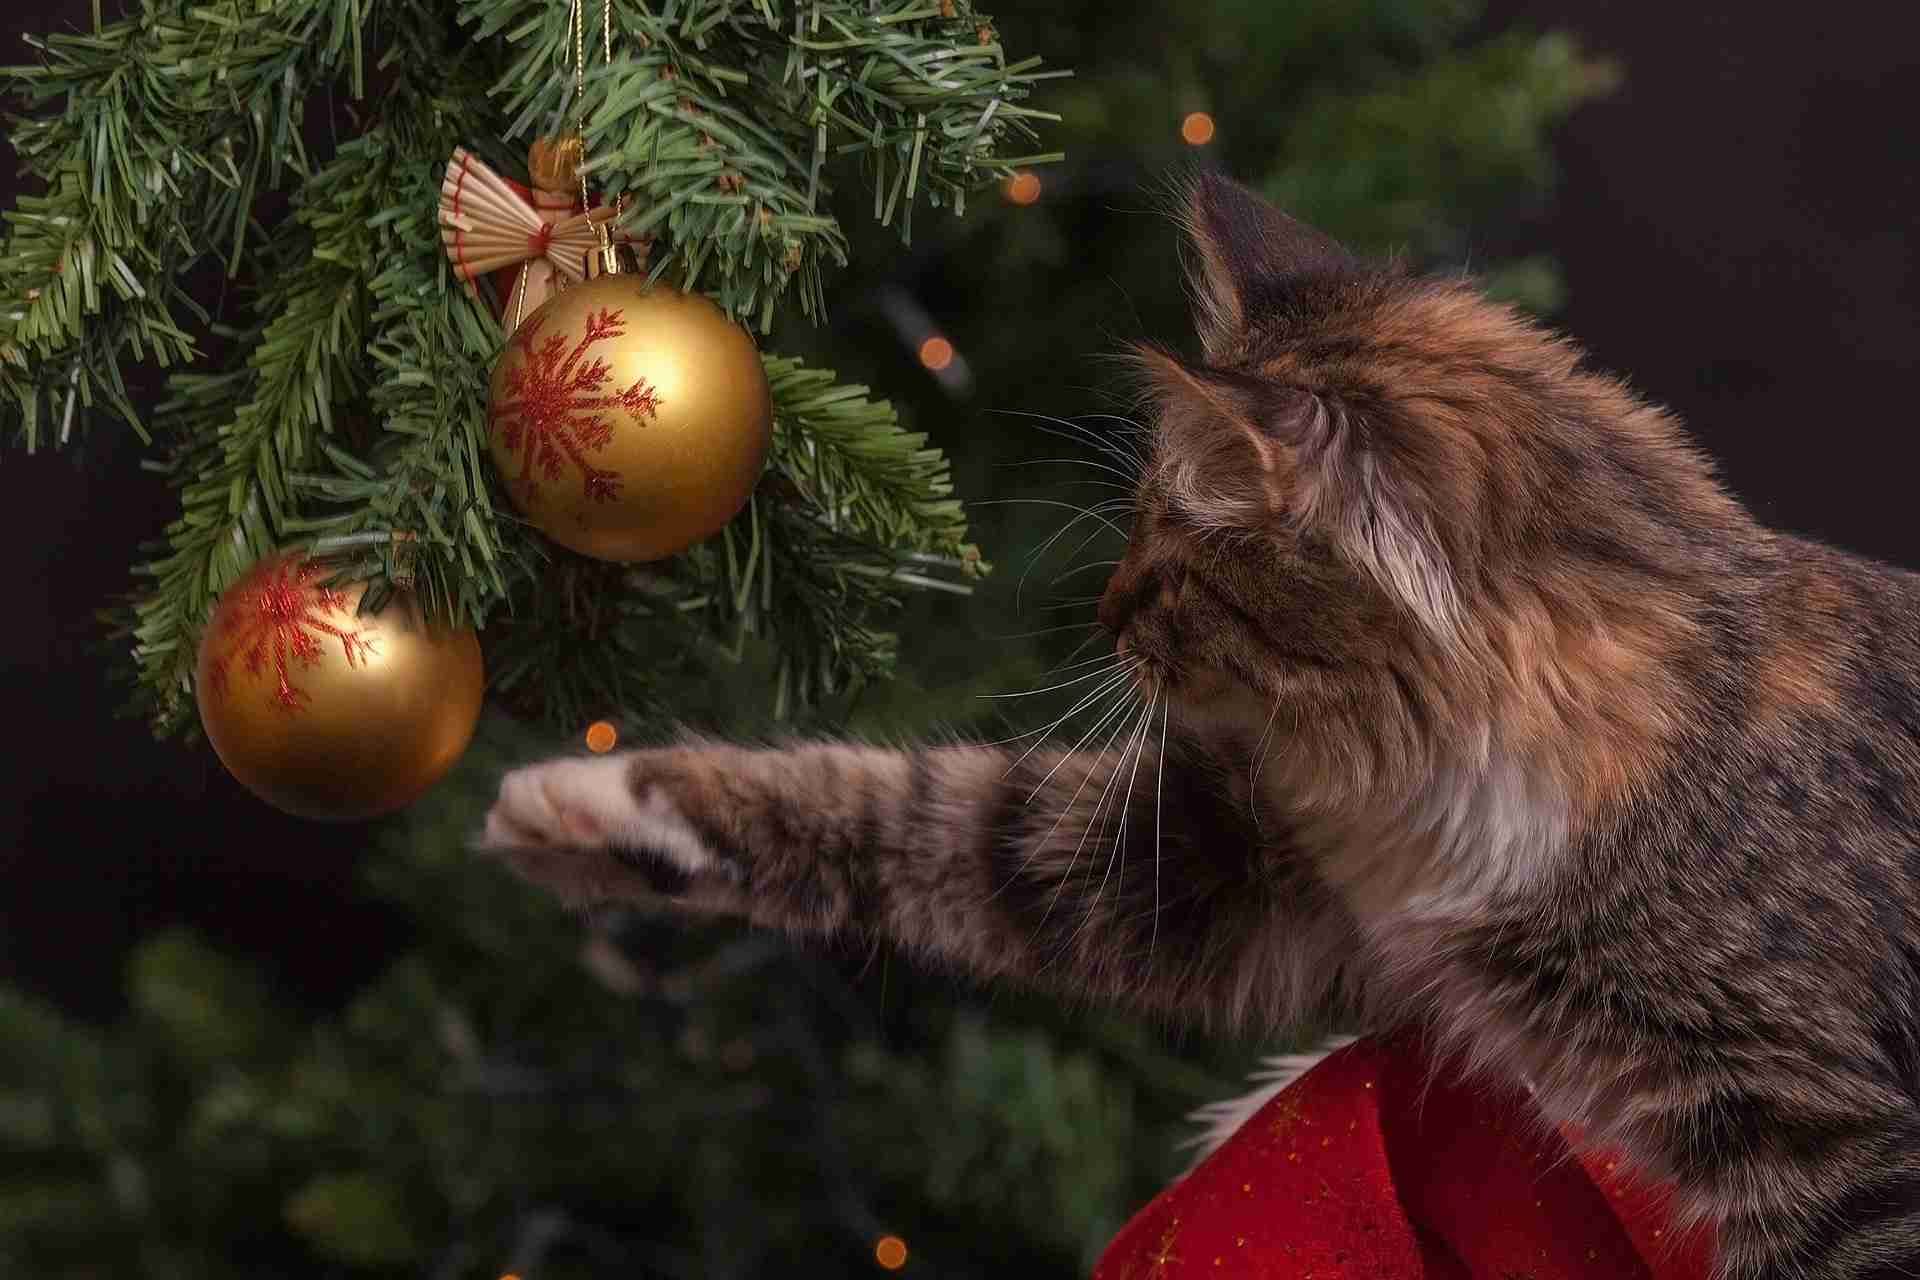 Keeping your animals safe during the festive season